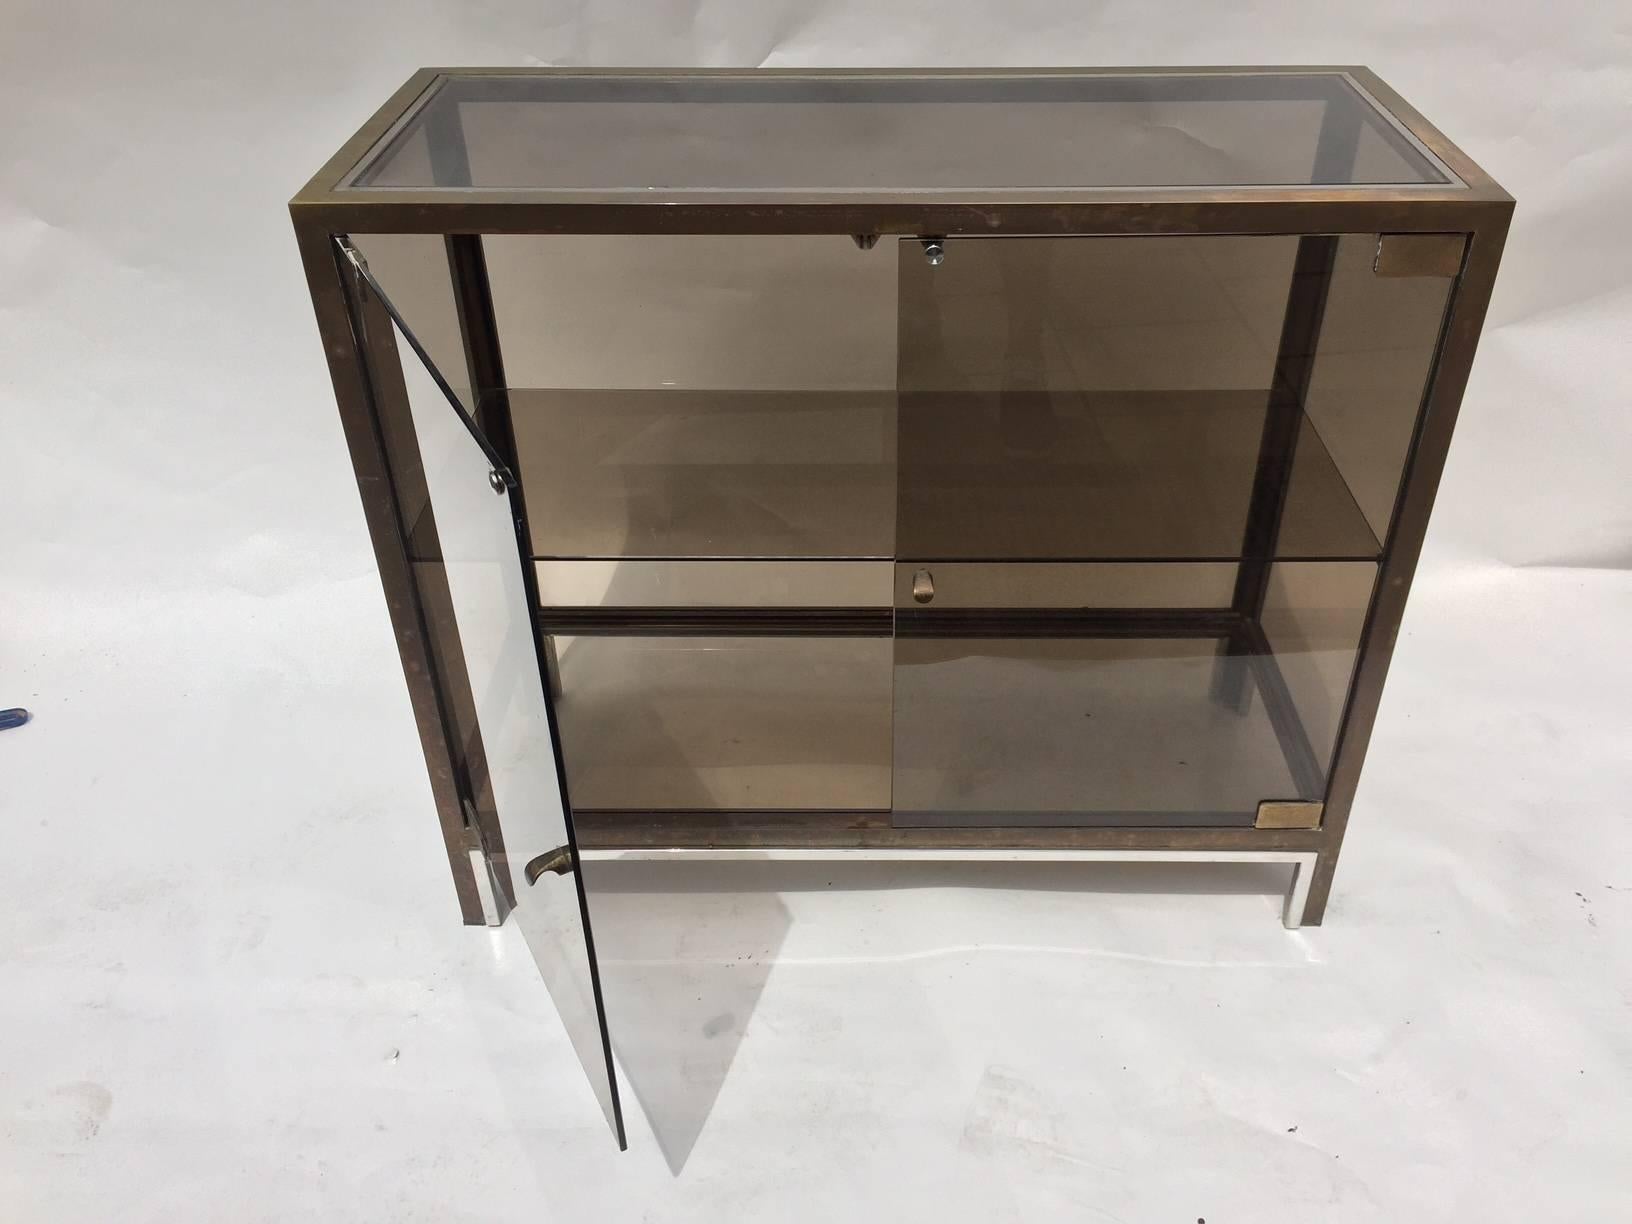 Combination of brass, chrome and smoke glass display cabinet with a shelve inside attributed to Willy Rizzo, Italian, 1960's.